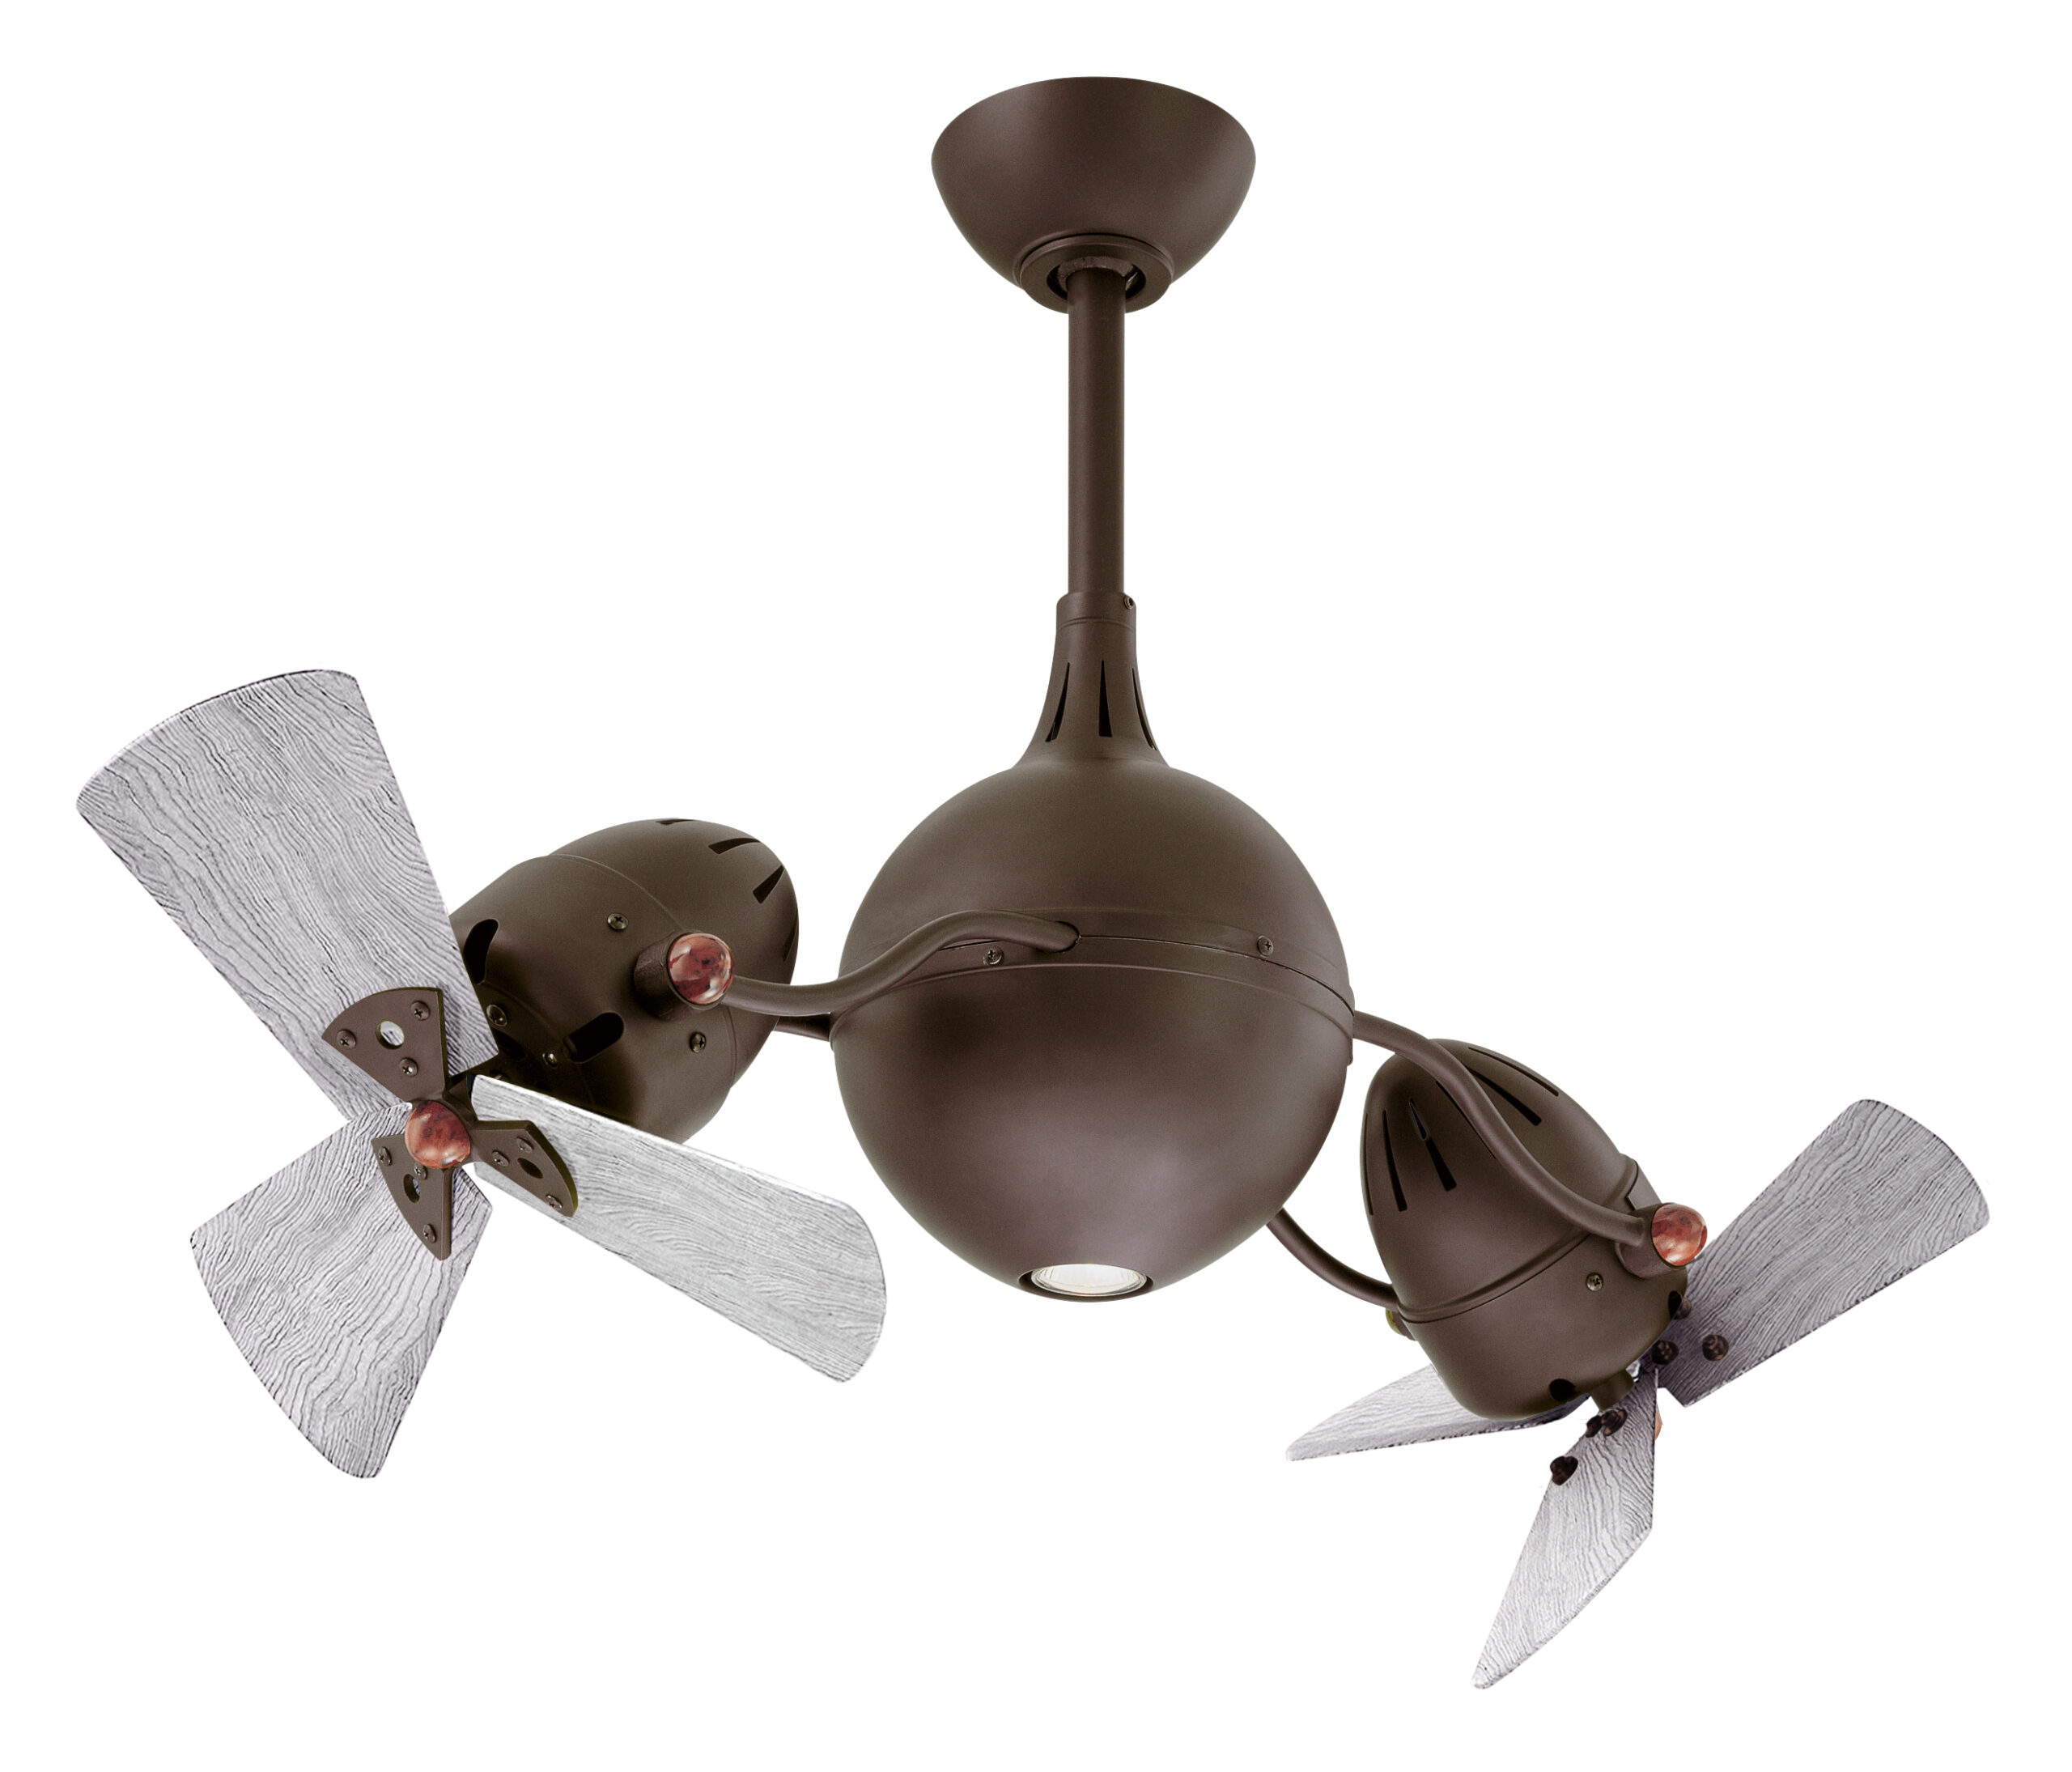 Acqua fan in textured bronze with barn wood blades